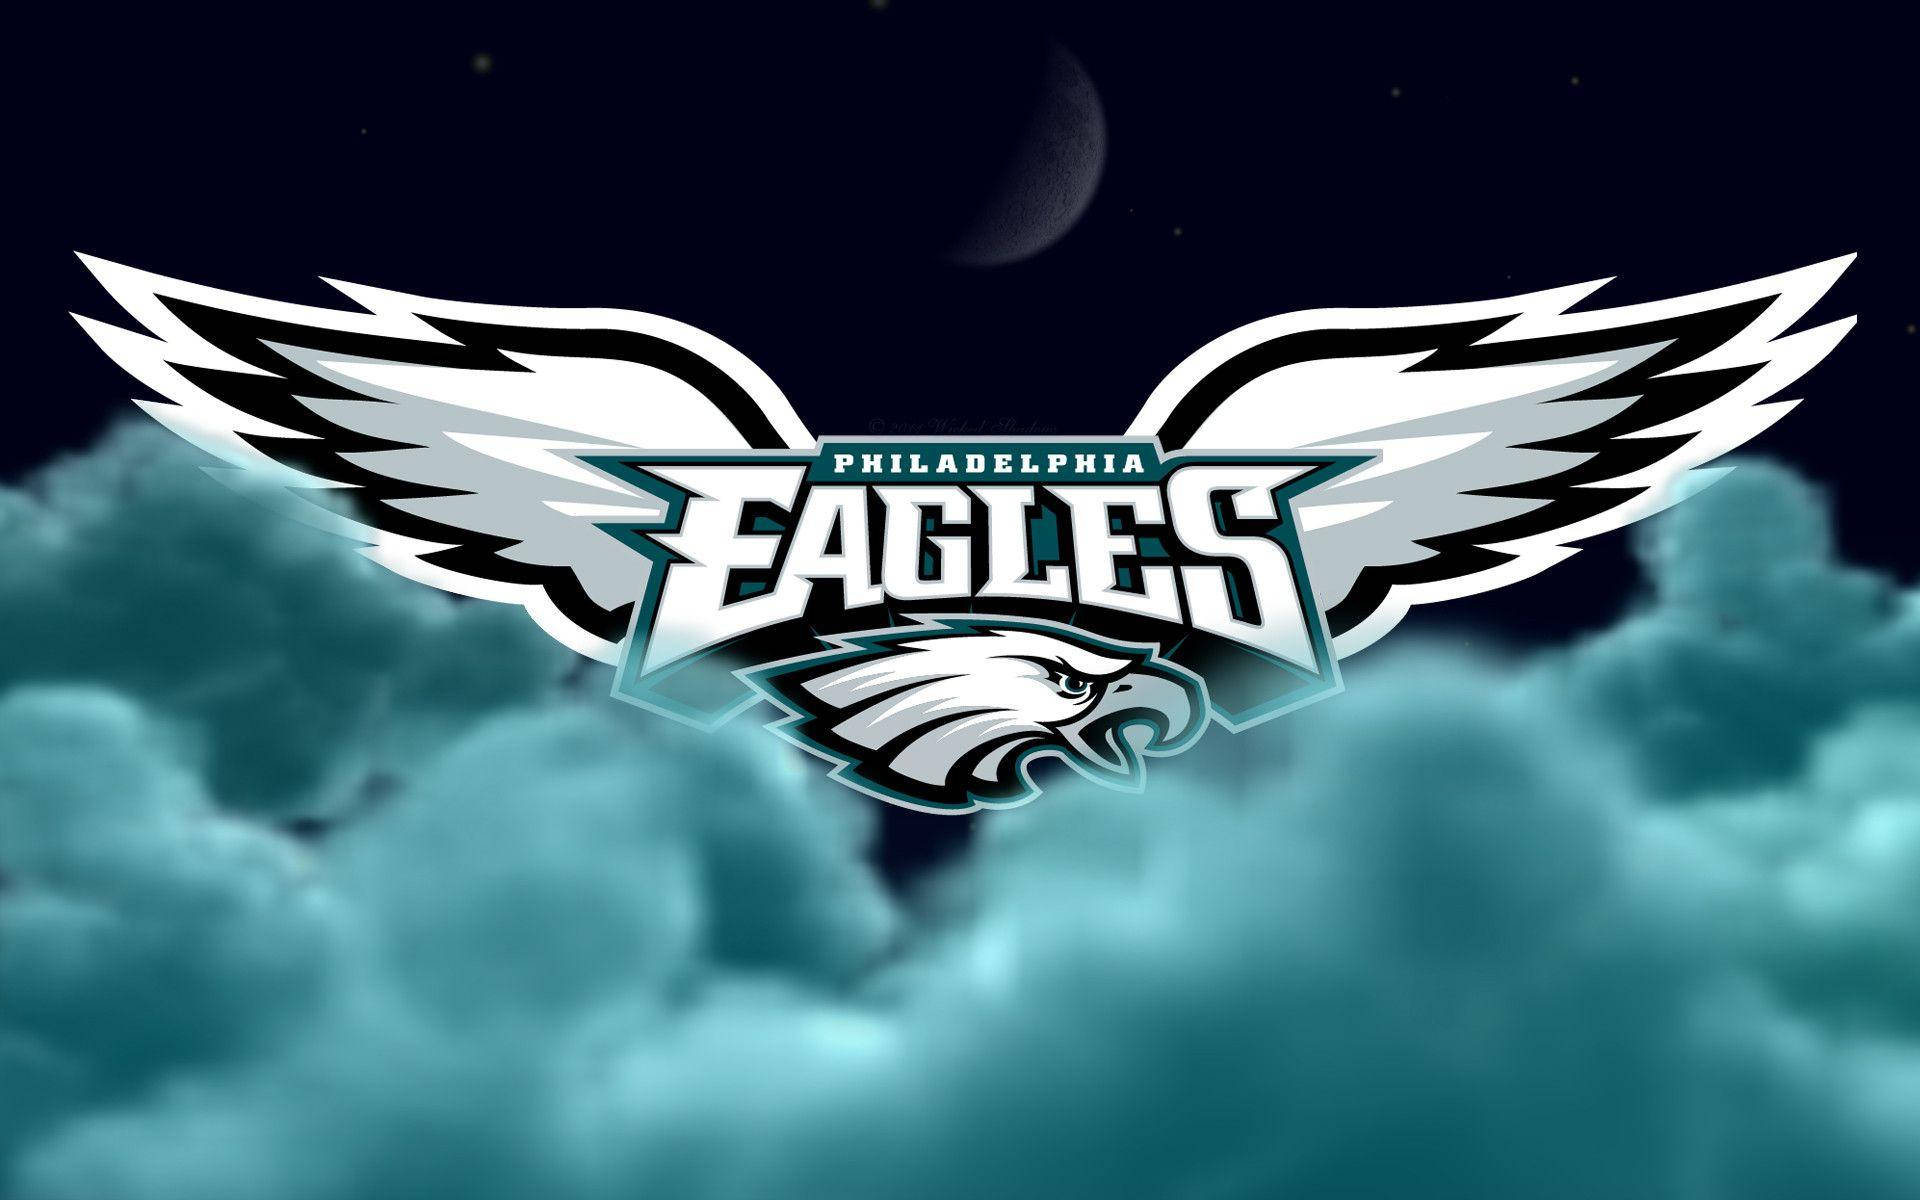 Philadelphia Eagles Logo With Wings Background